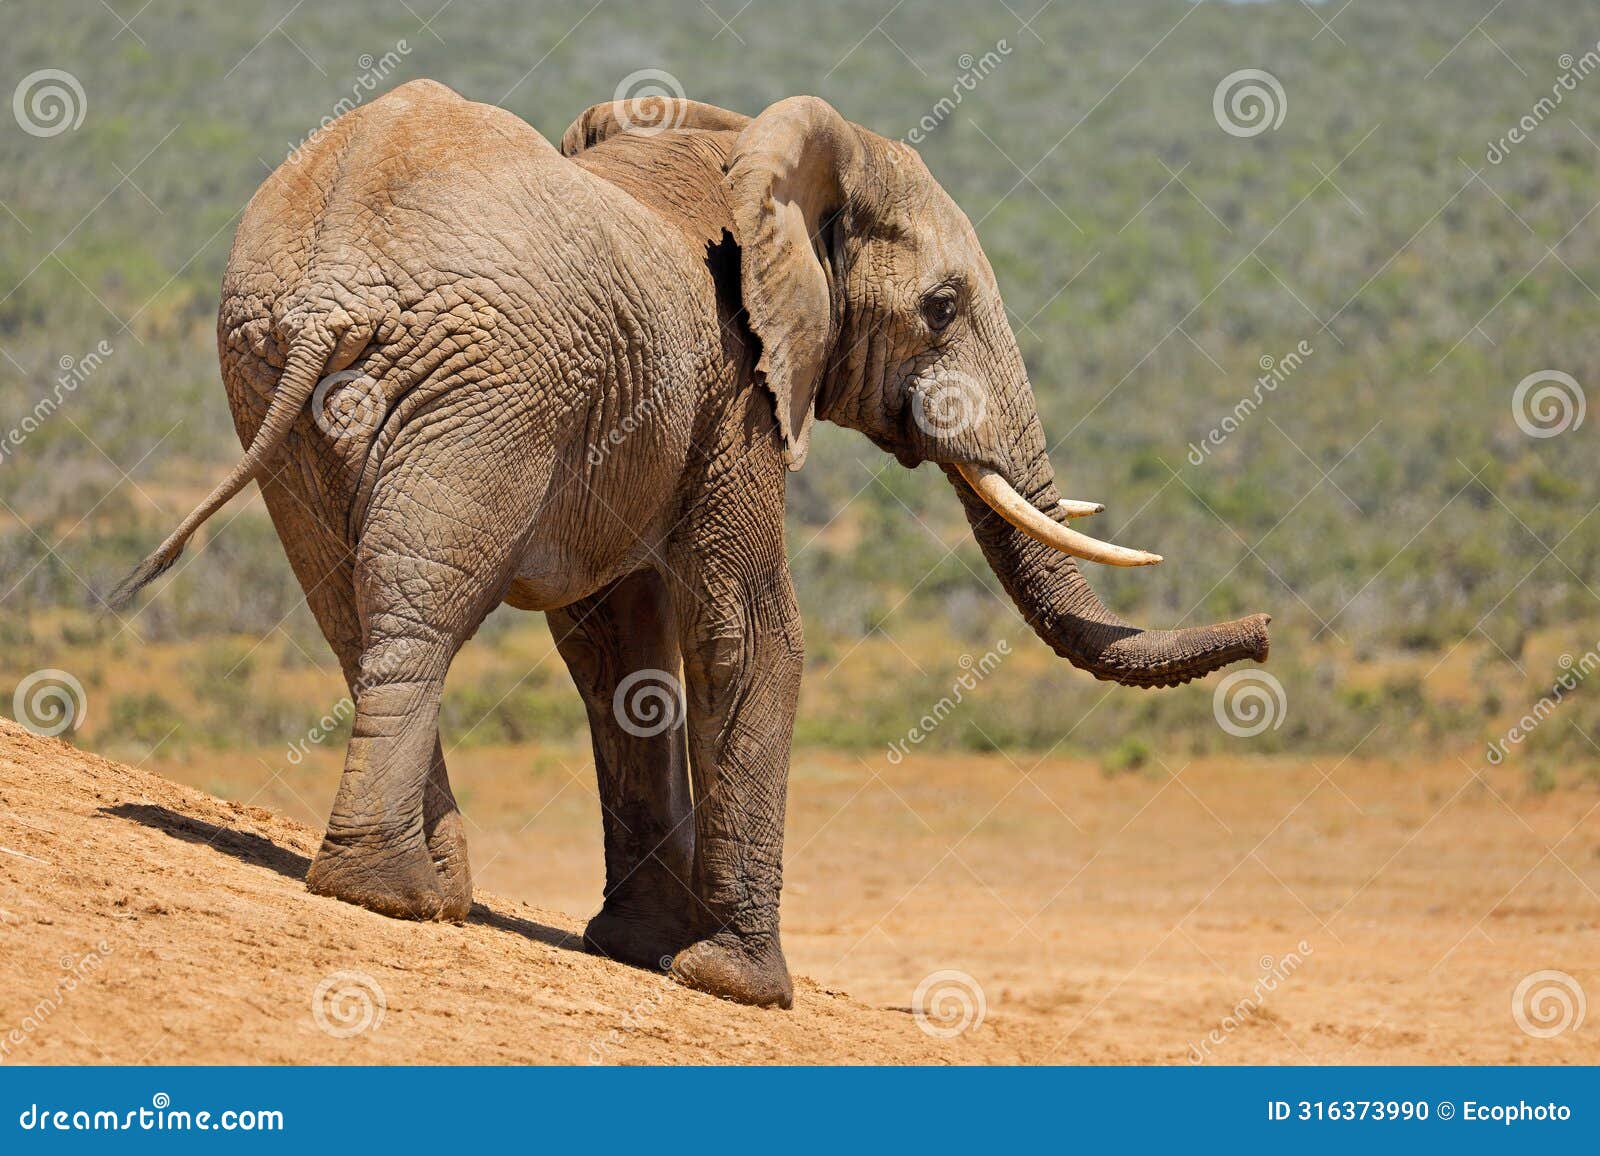 a large african bull elephant in natural habitat, addo elephant national park, south africa